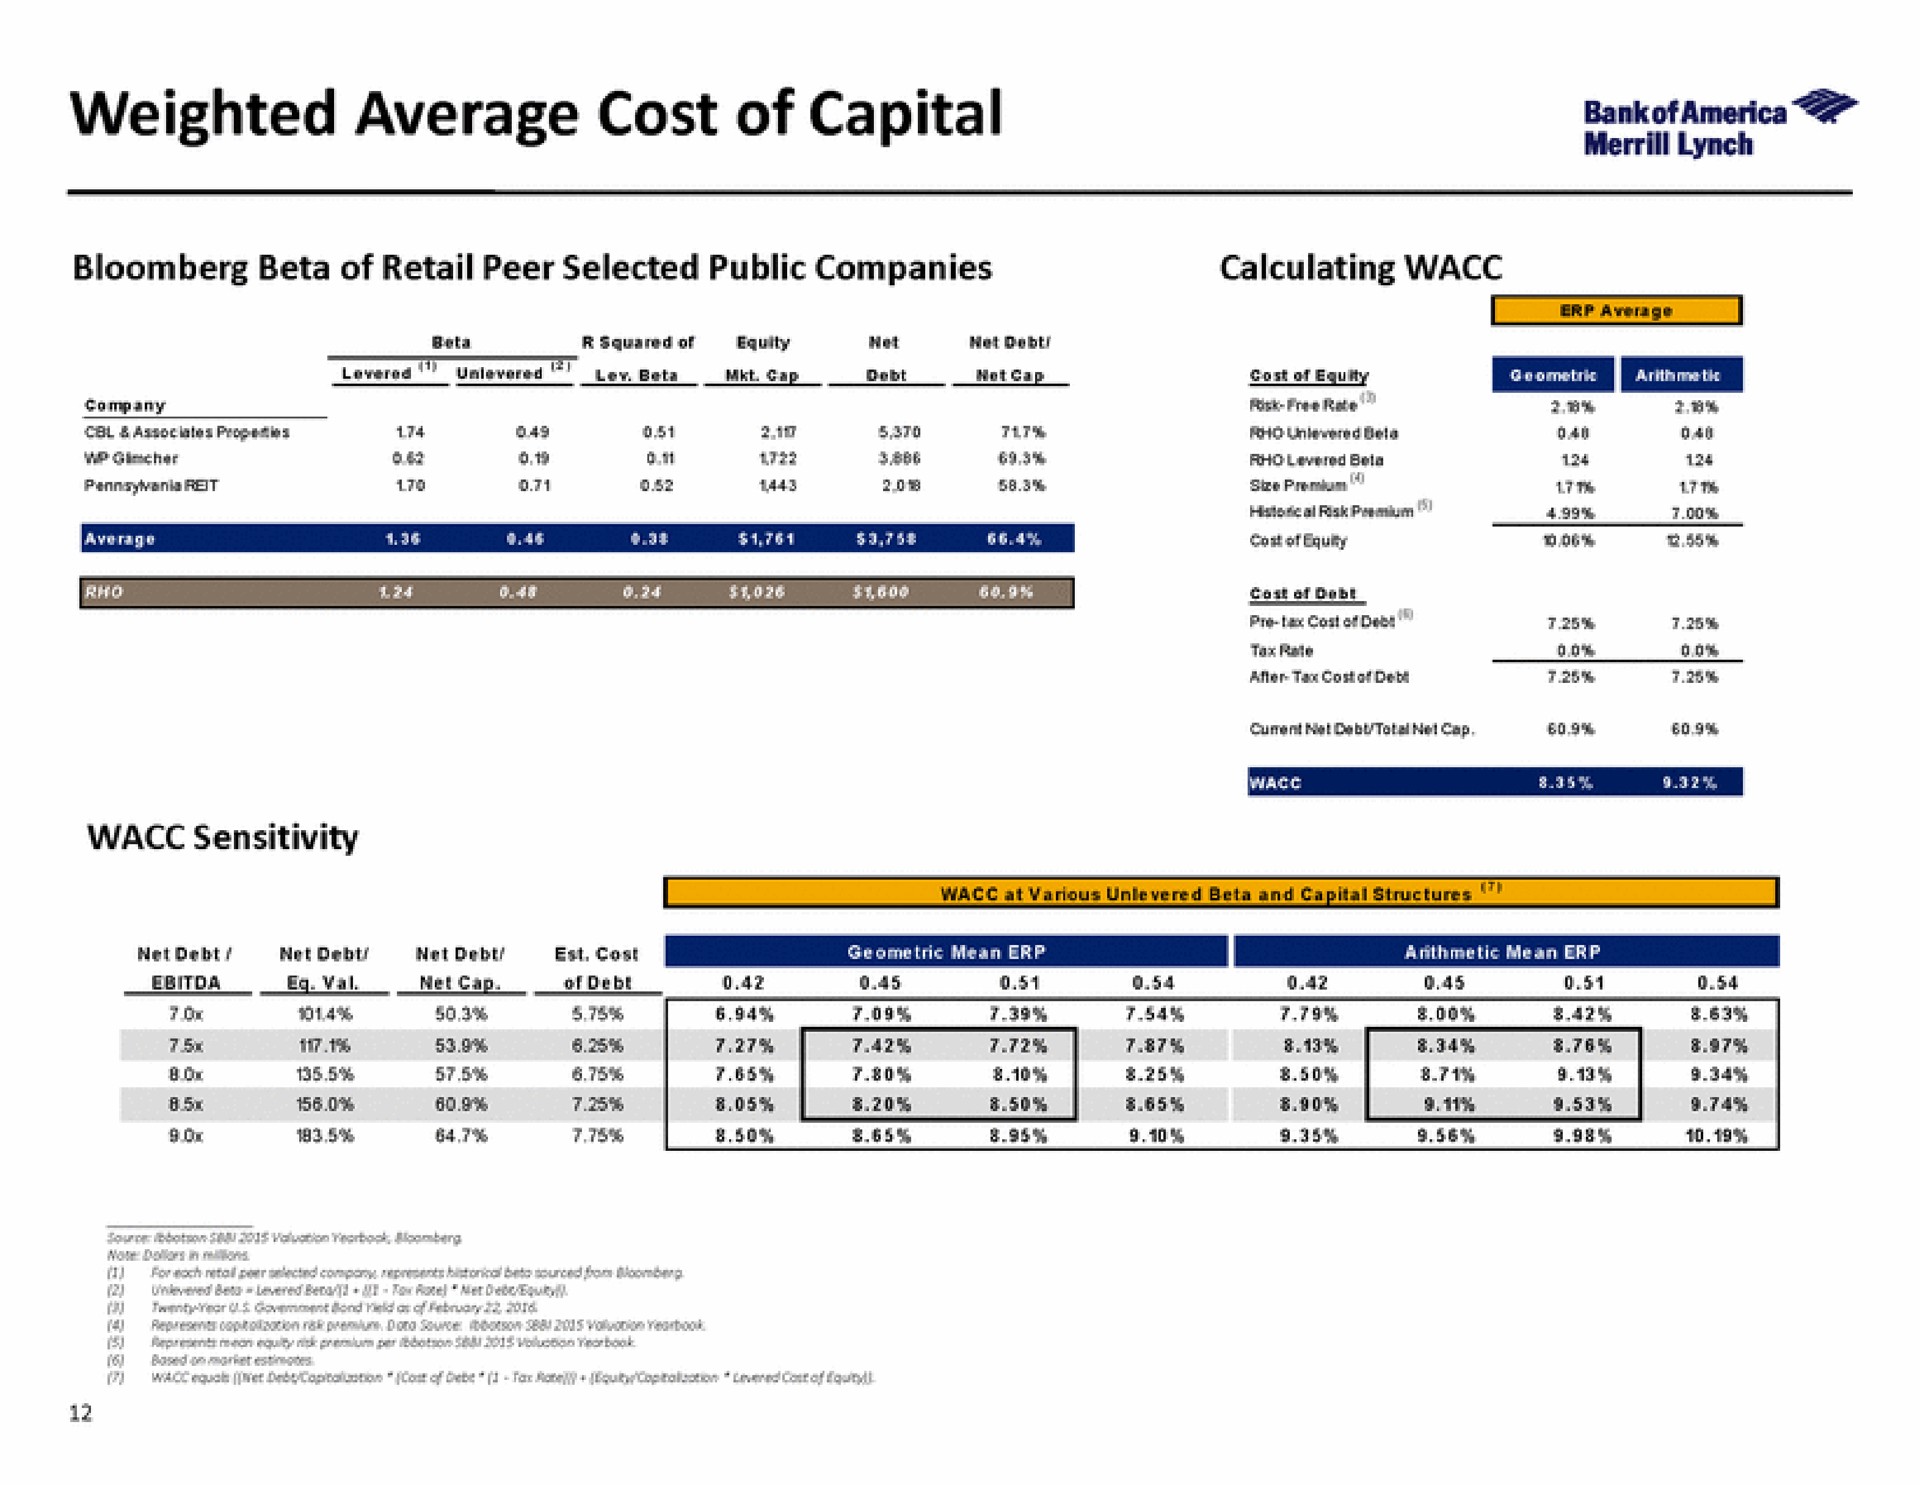 weighted average cost of capital | Bank of America